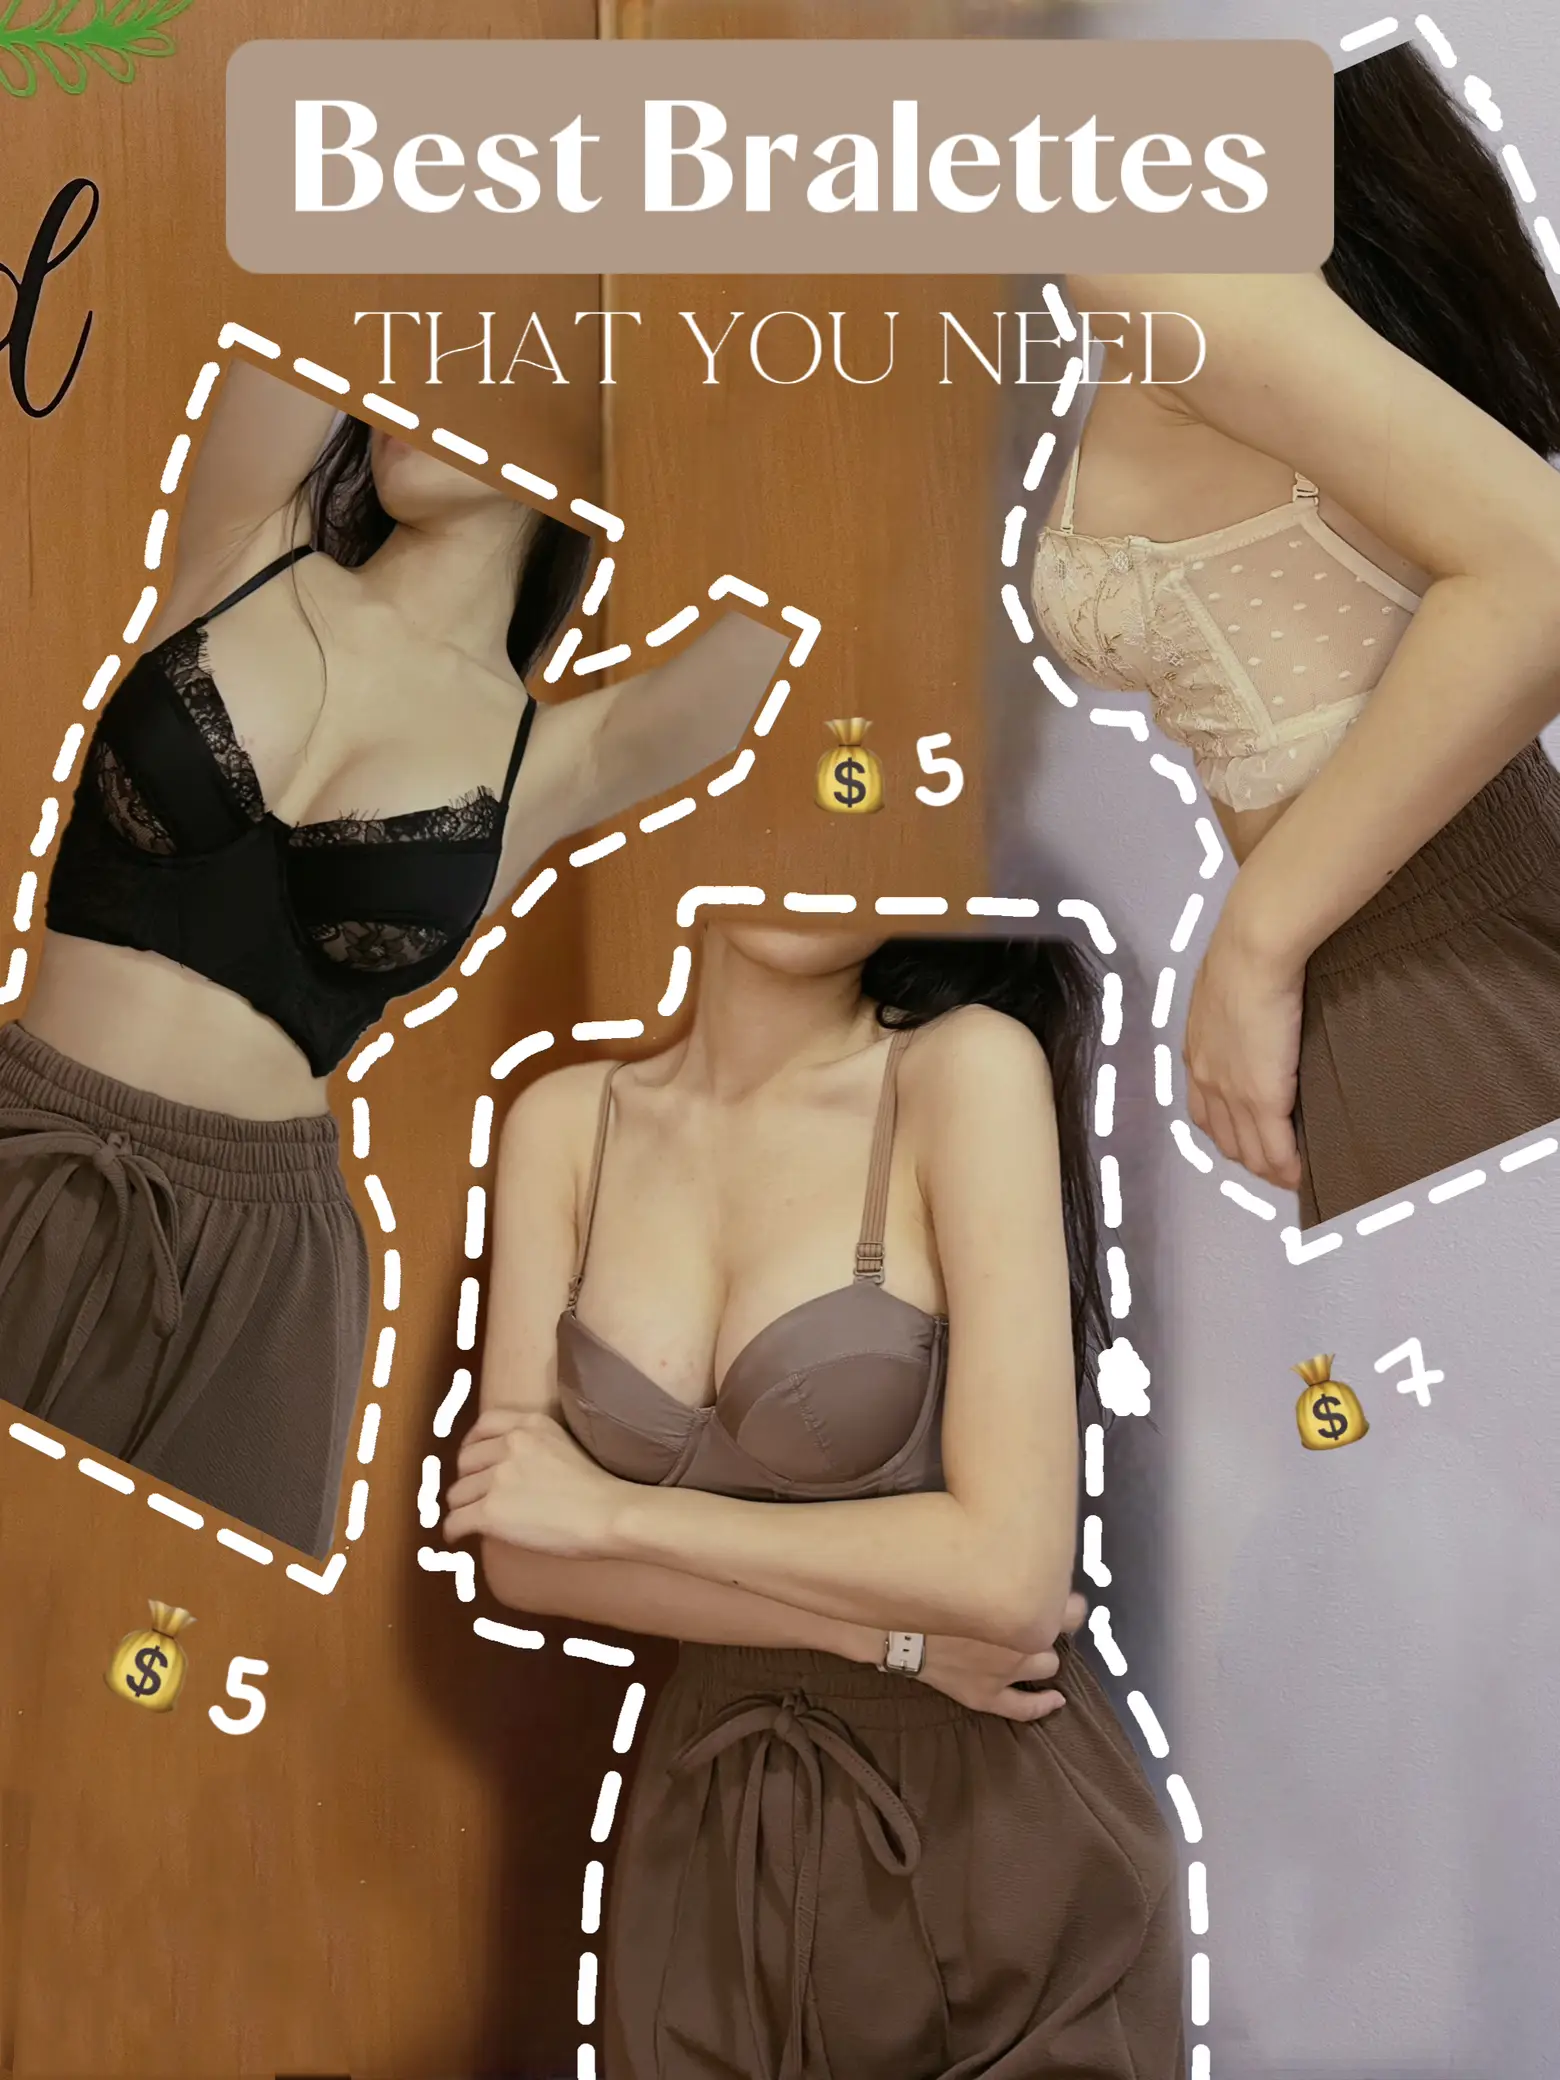 Sticky Inserts: Because life is complicated, your bra shouldn't be